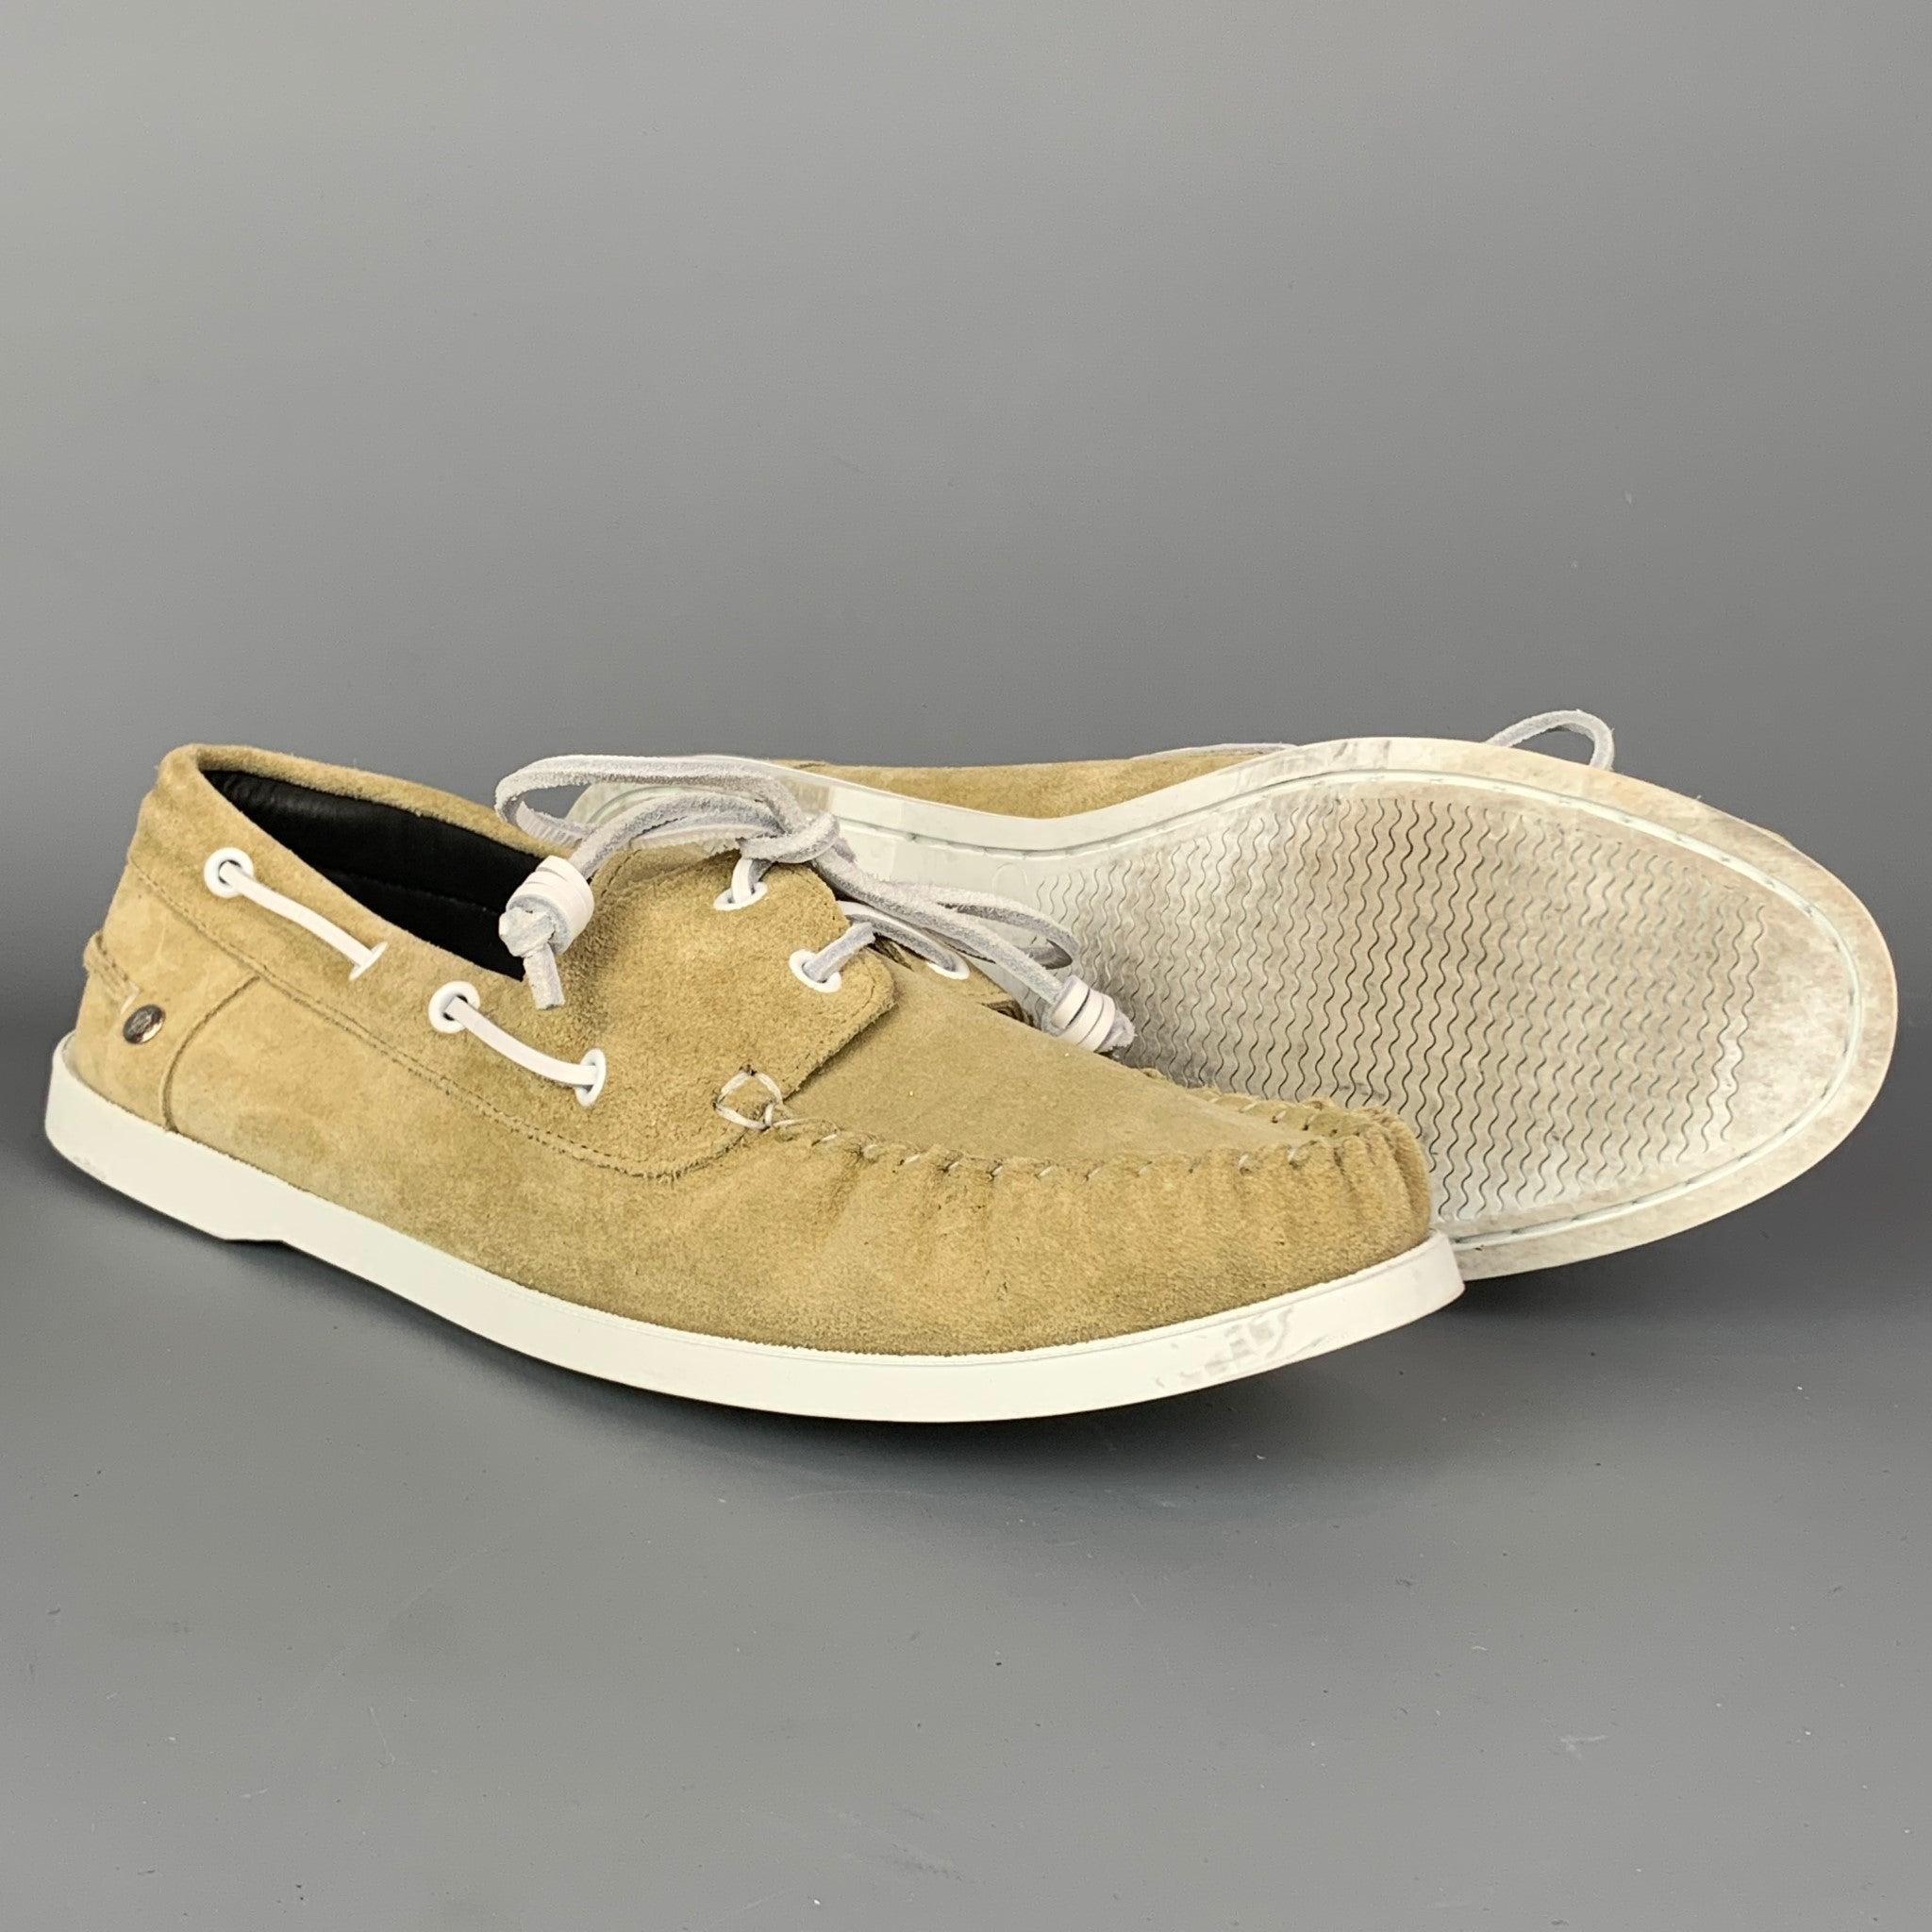 LOEWE Size 11 Natural Leather Boat Shoe Loafers In Good Condition For Sale In San Francisco, CA